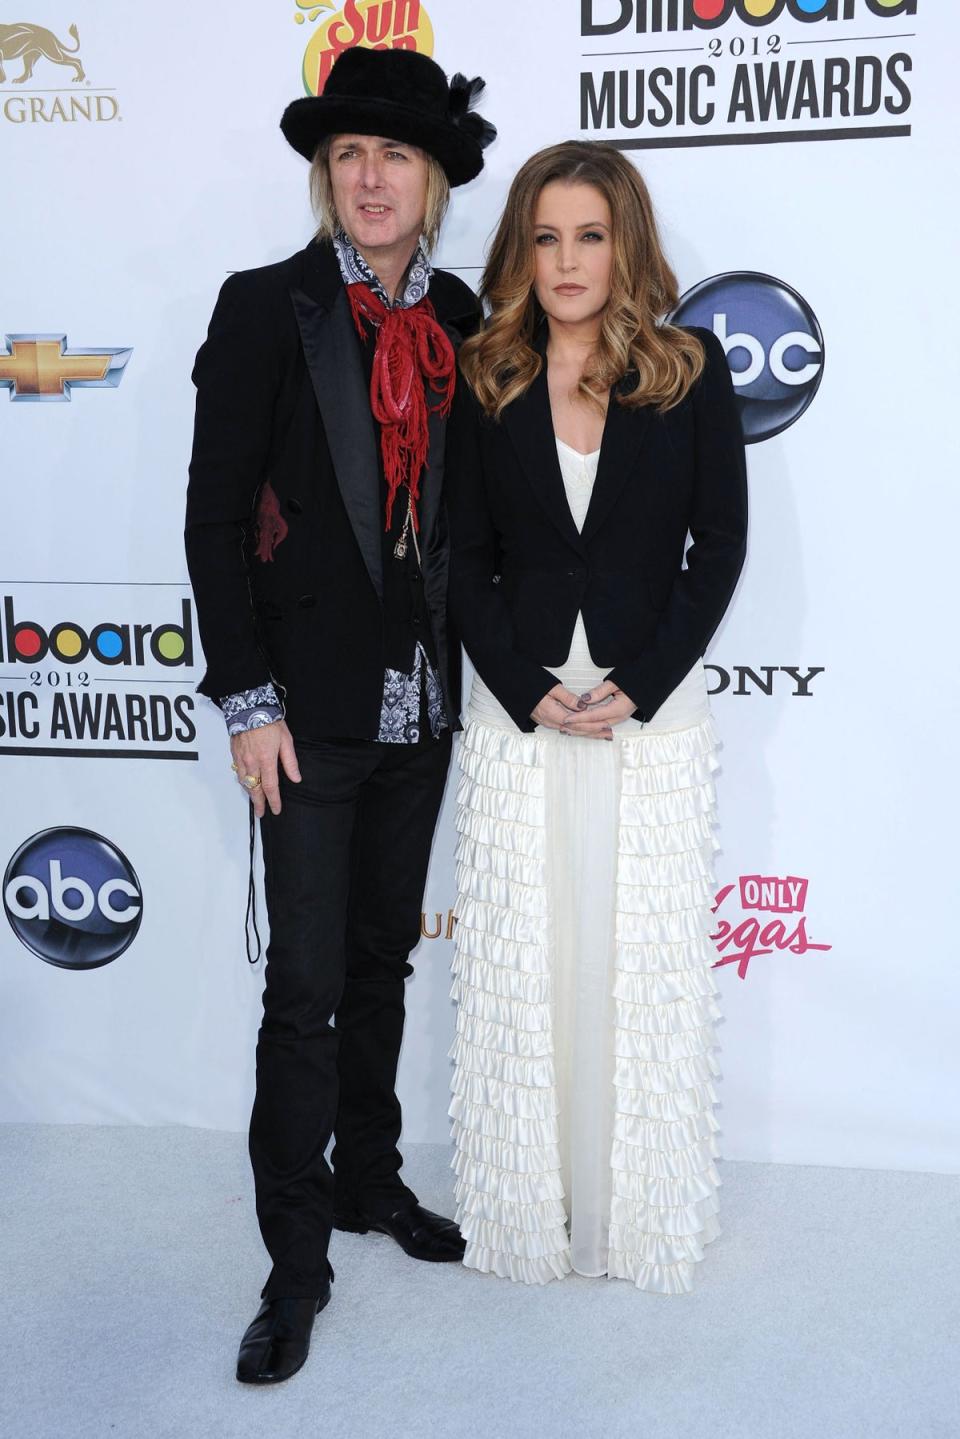 Michael Lockwood and Lisa Marie Presley moved to Sussex in 2010 (Chris Delmas / AFP via Getty Images)